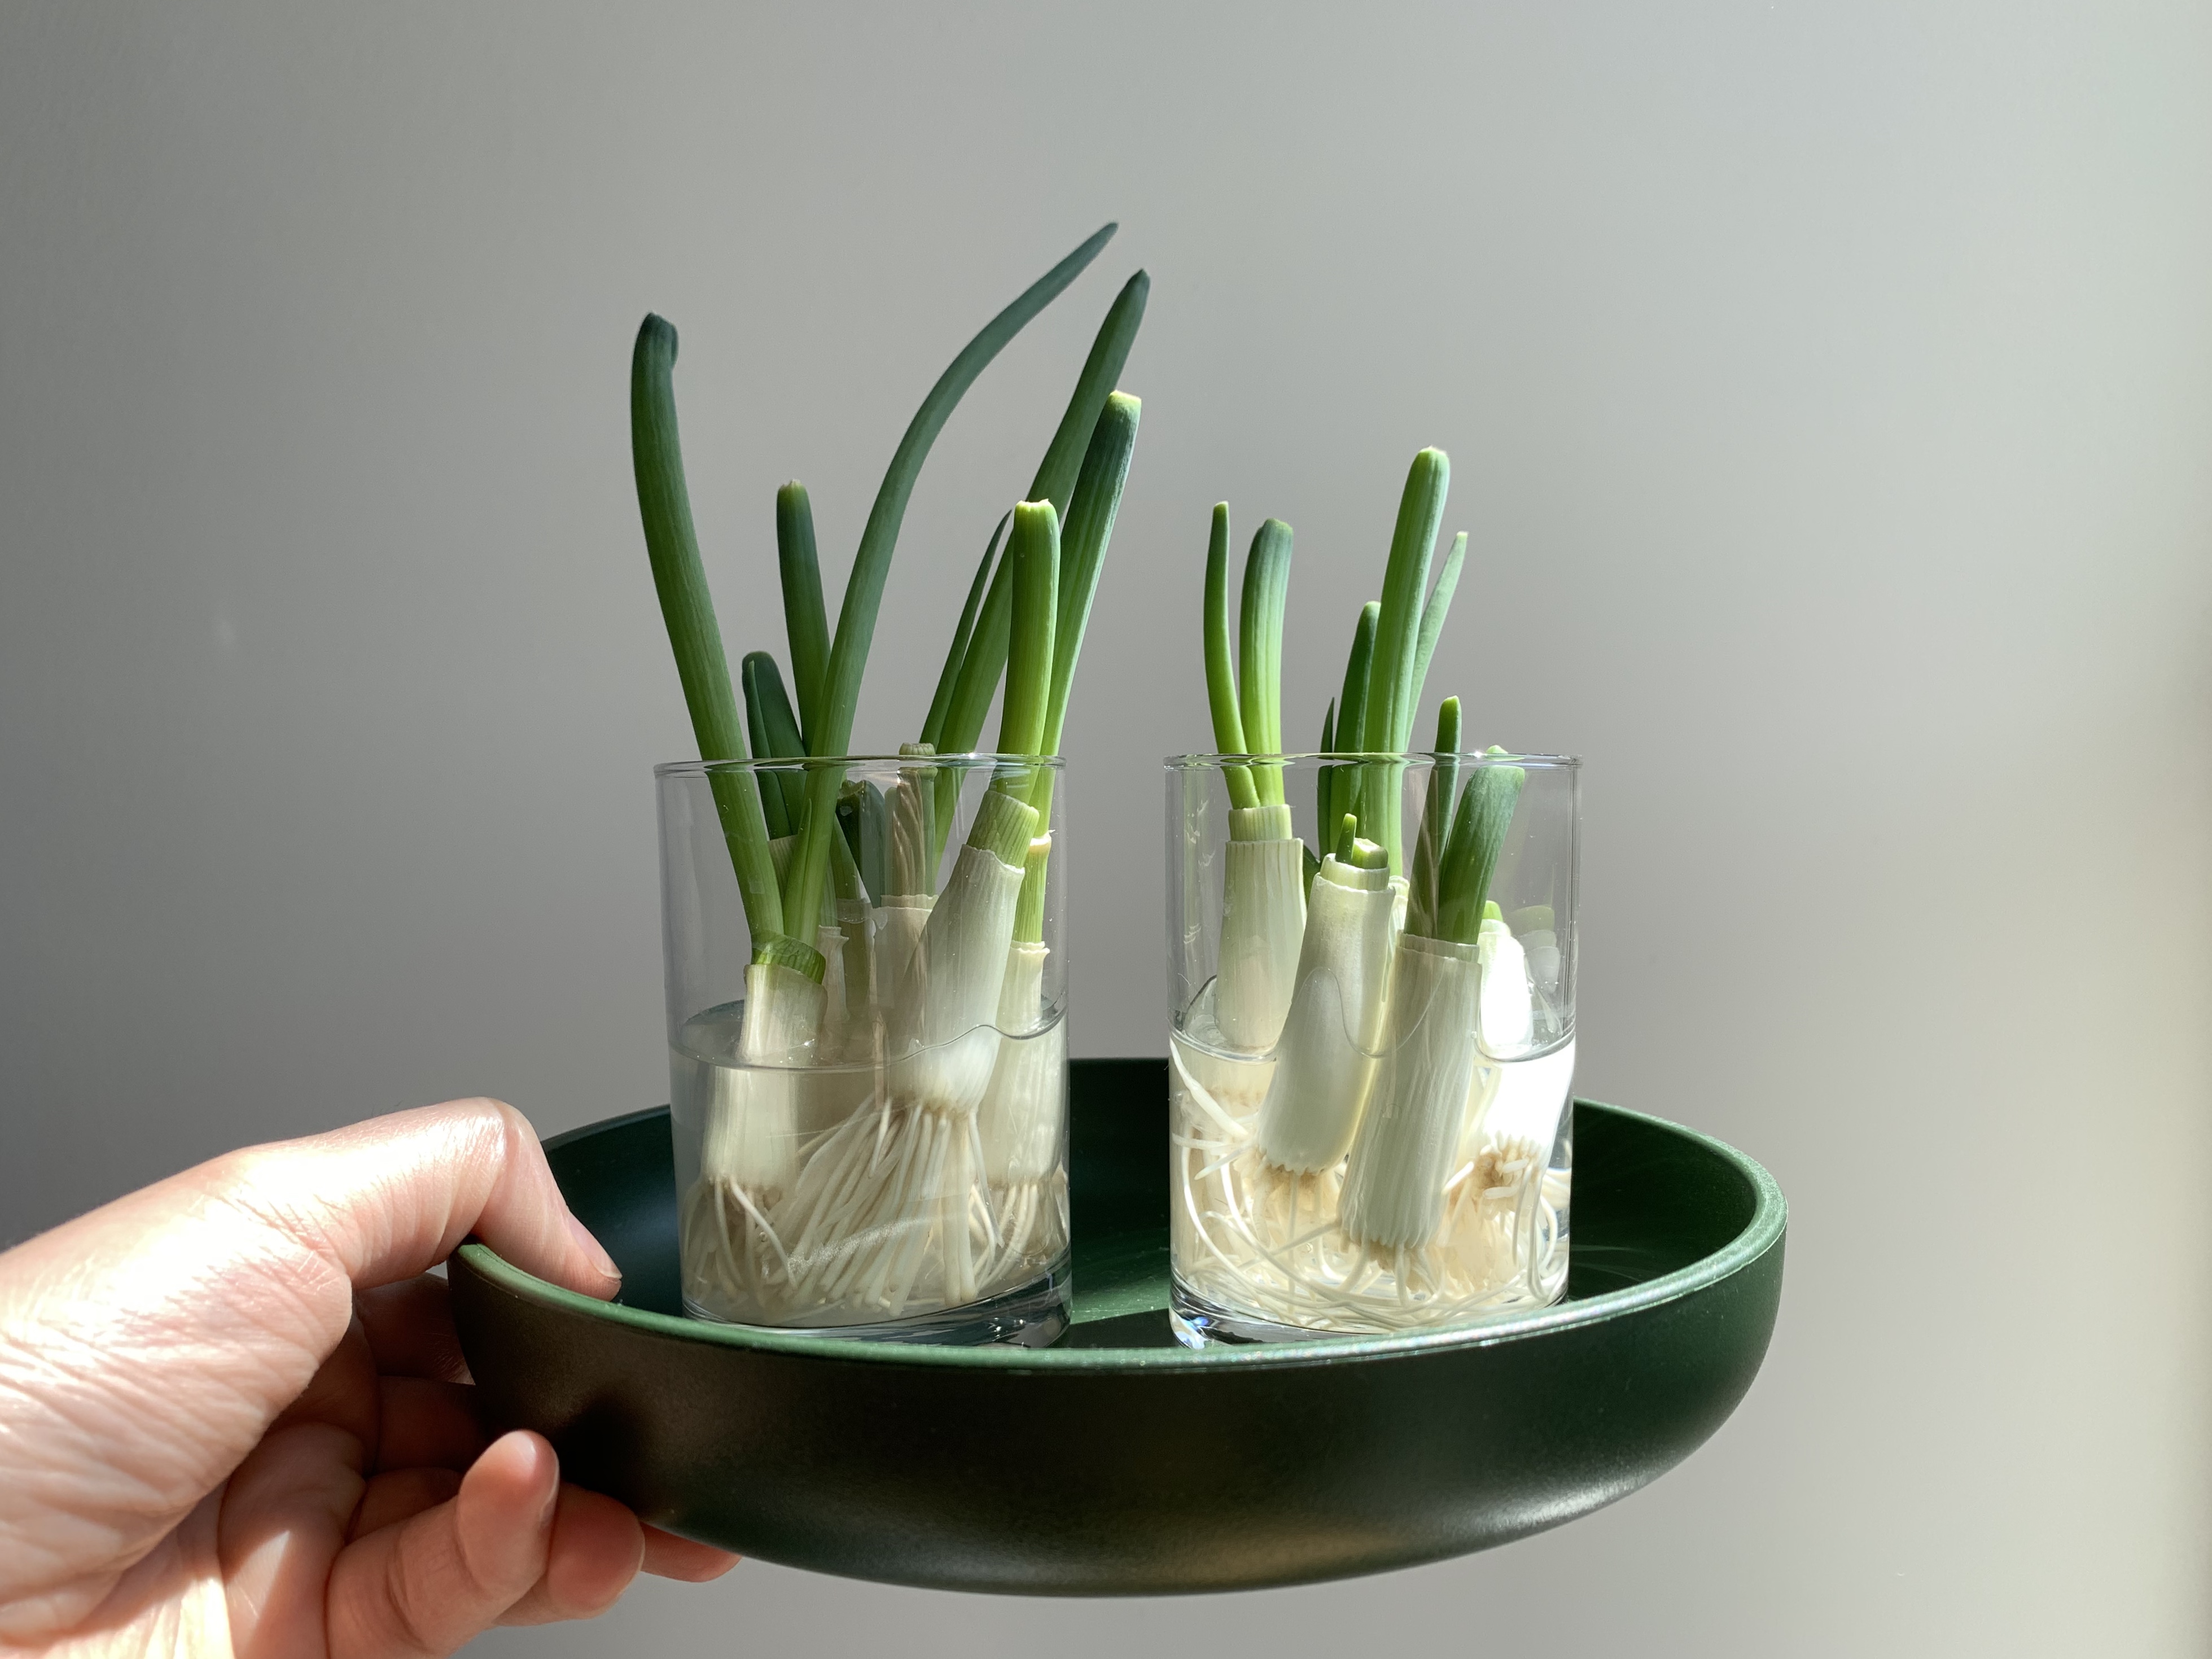 Scallion bulbs in a two glass jars on a round green tray.